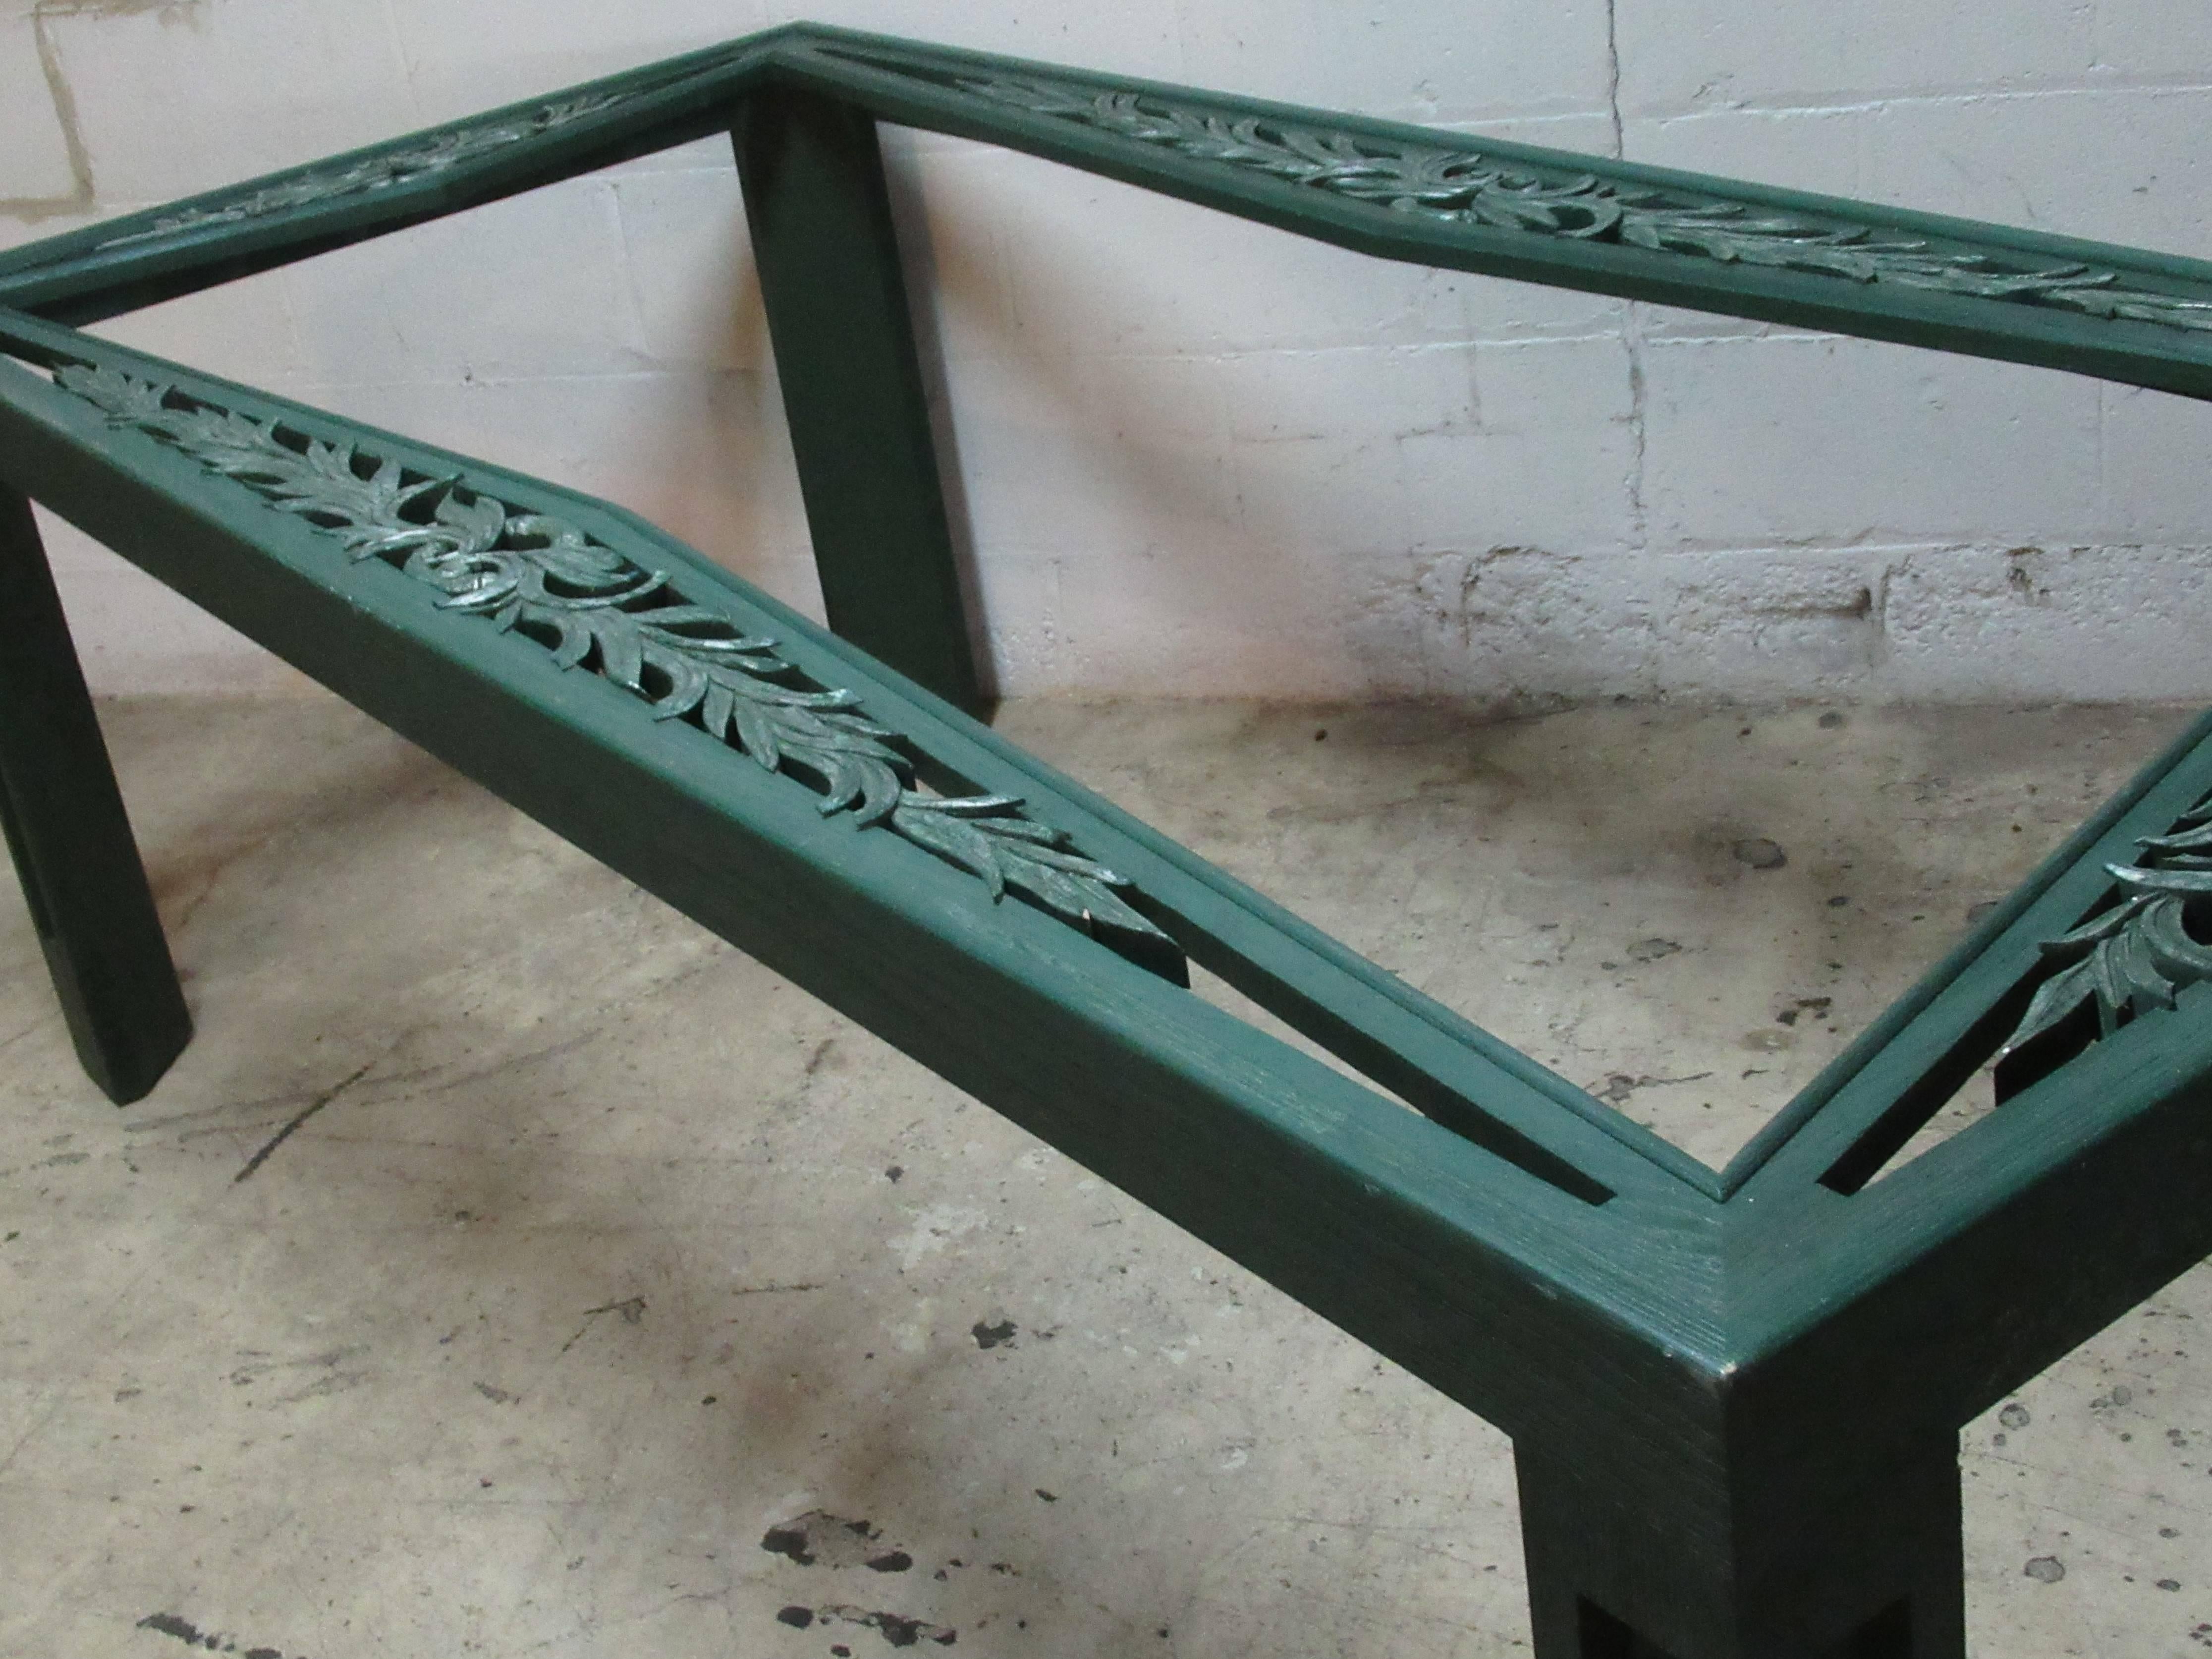 Art Deco style large rectangular dining table by James Mont with carved leaf design perimeter at all four sides of top and deep cut-out design on legs. It is in the original green cerused stain painted and silver leaf like finish. Structurally rock